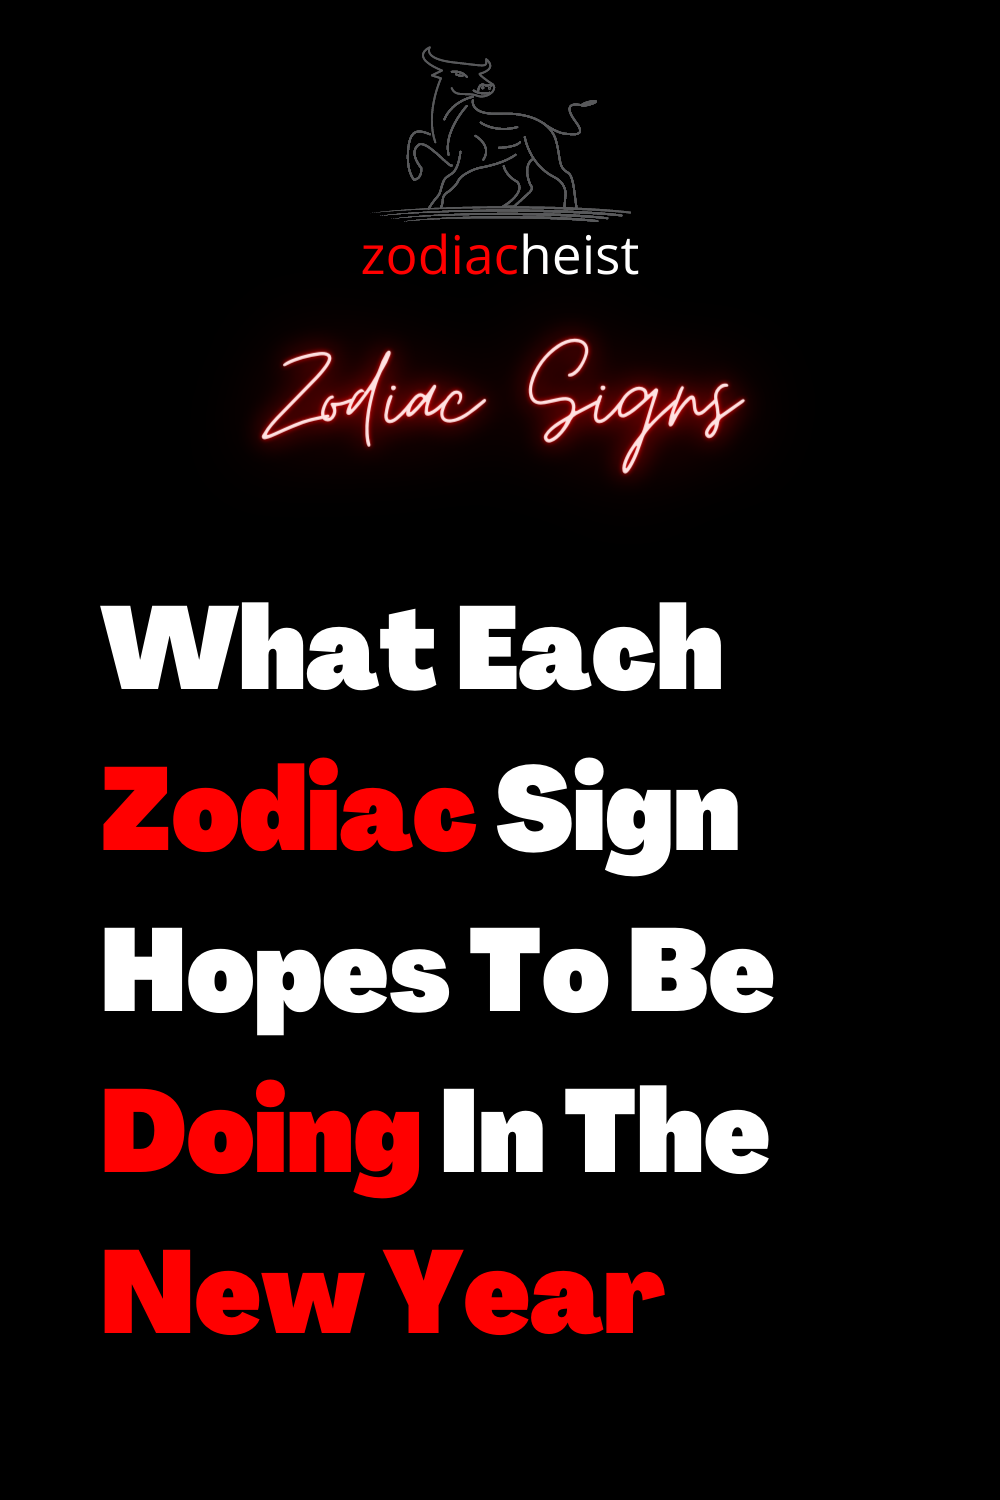 What Each Zodiac Sign Hopes To Be Doing In The New Year